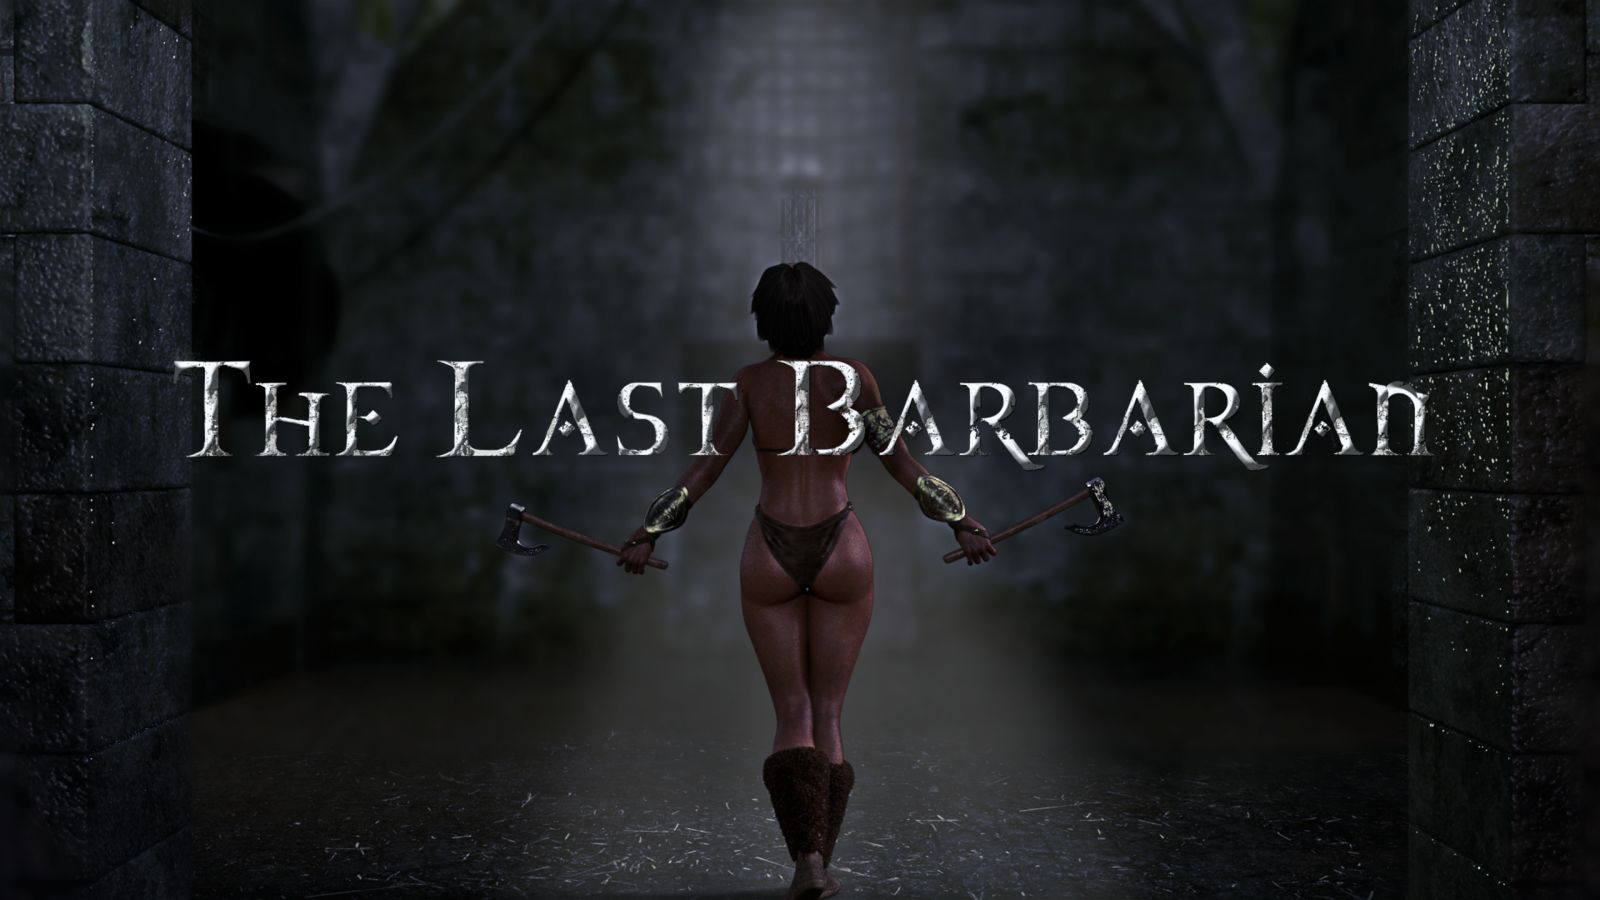 Unity] The Last Barbarian - v0.9.27.1 by Viktor Black 18+ Adult xxx Porn  Game Download